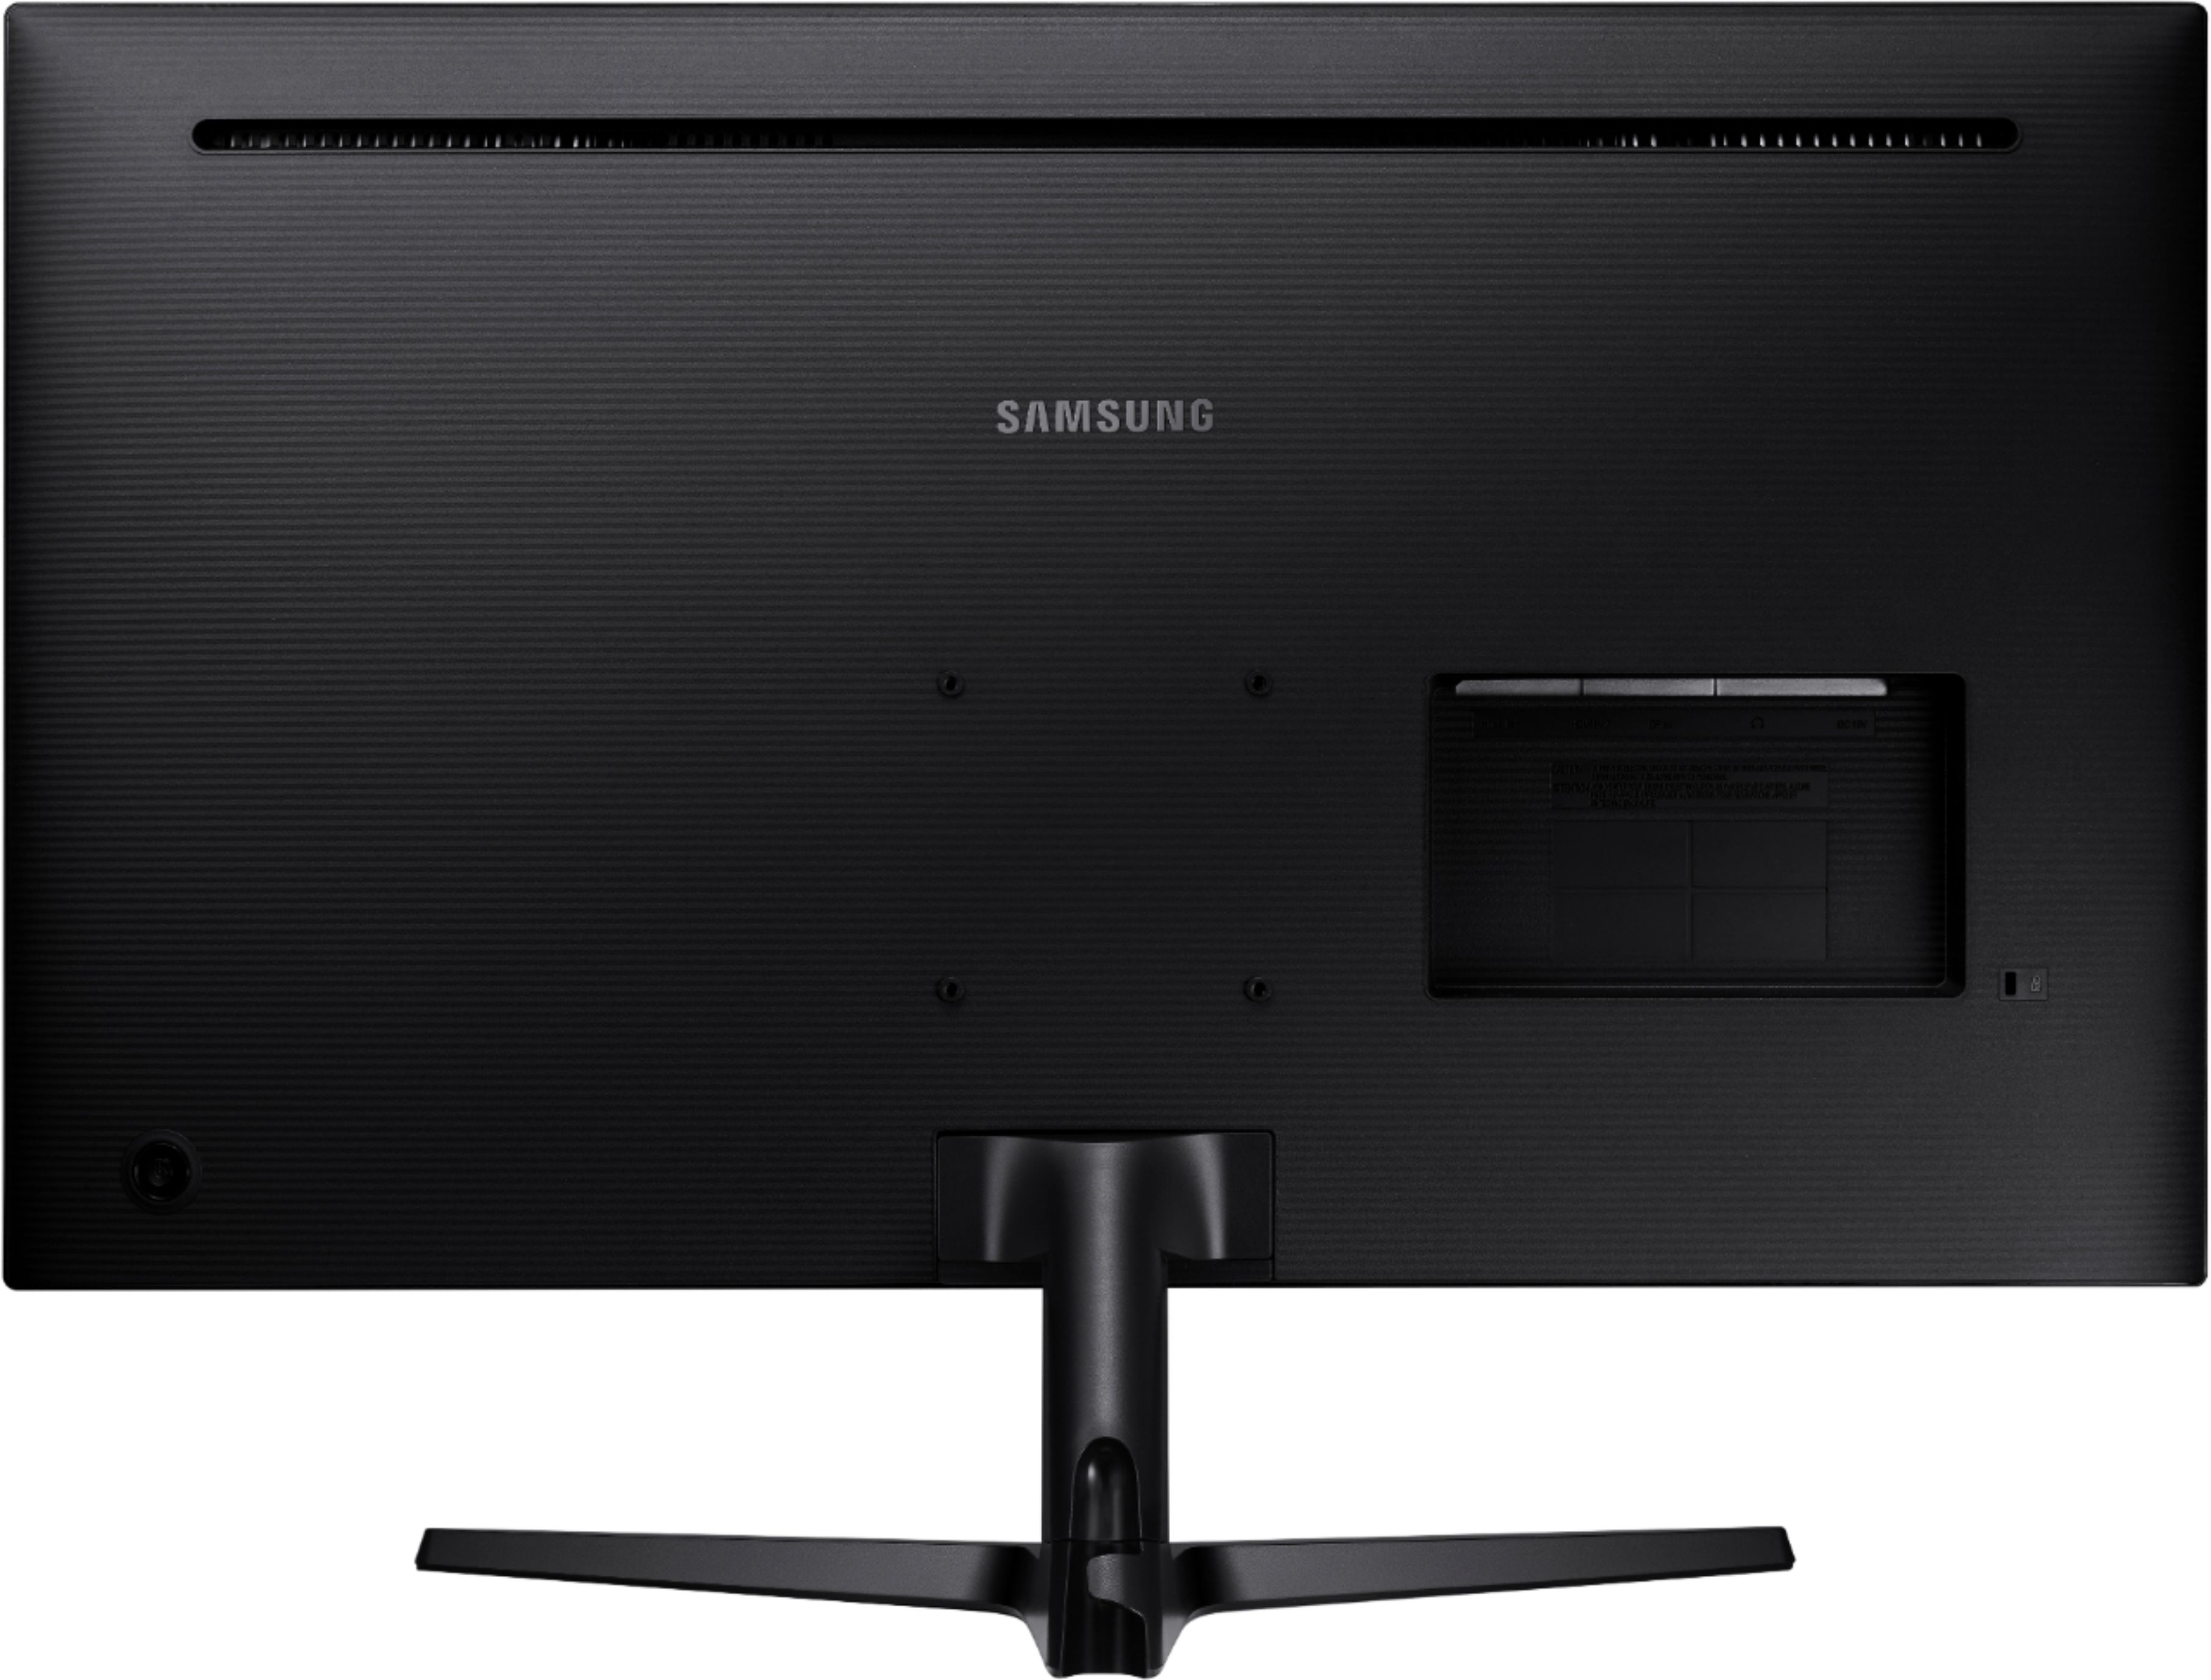 Back View: Samsung - G77 Series 27" Curved WQHD Gaming Monitor With Special T1 Faker Design (HDMI, USB) - Black